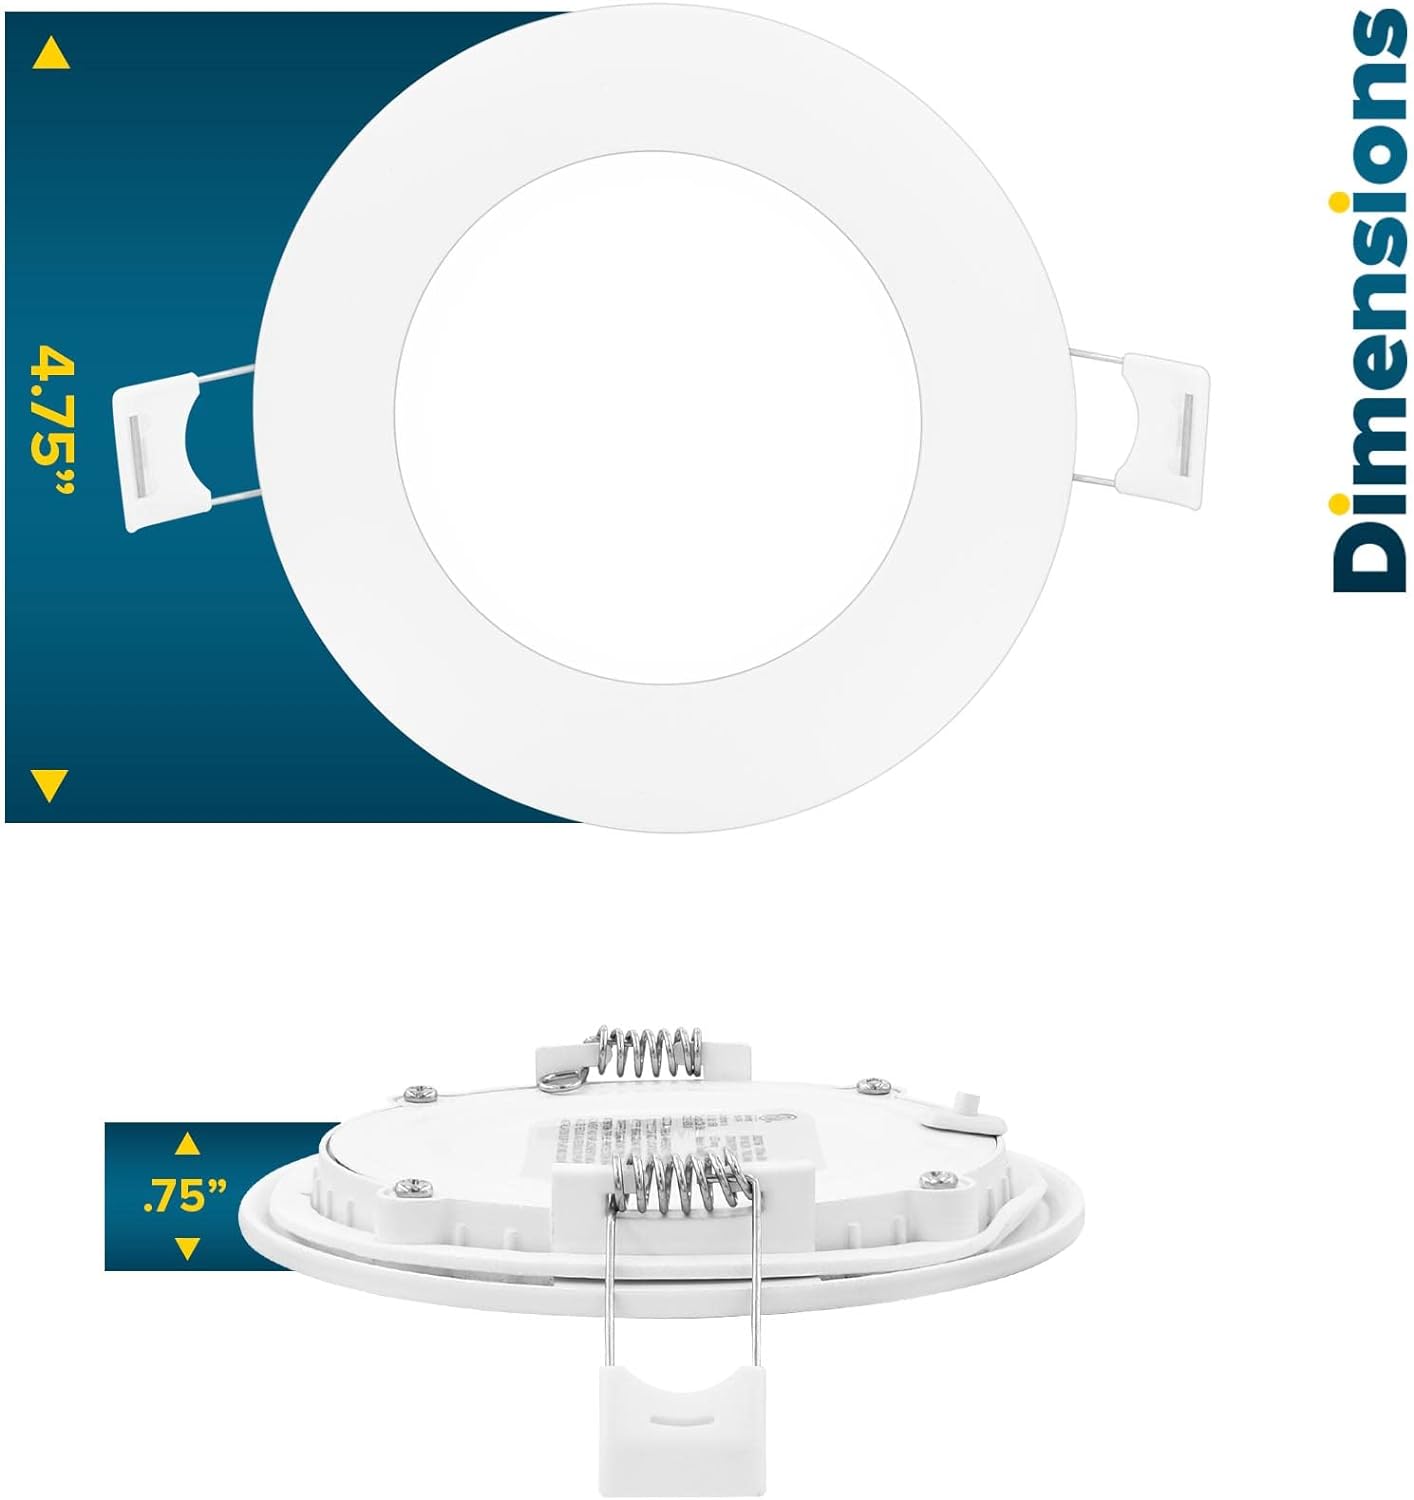 SUNPERIAN 12-Pack 4 Inch Ultra-Thin LED Recessed Lighting with Junction Box, 5 Color Options 2700K/3000K/3500K/4000K/5000K, 10W, 750 Lumens, Dimmable Wafer Lights, Wet Rated, IC Rated